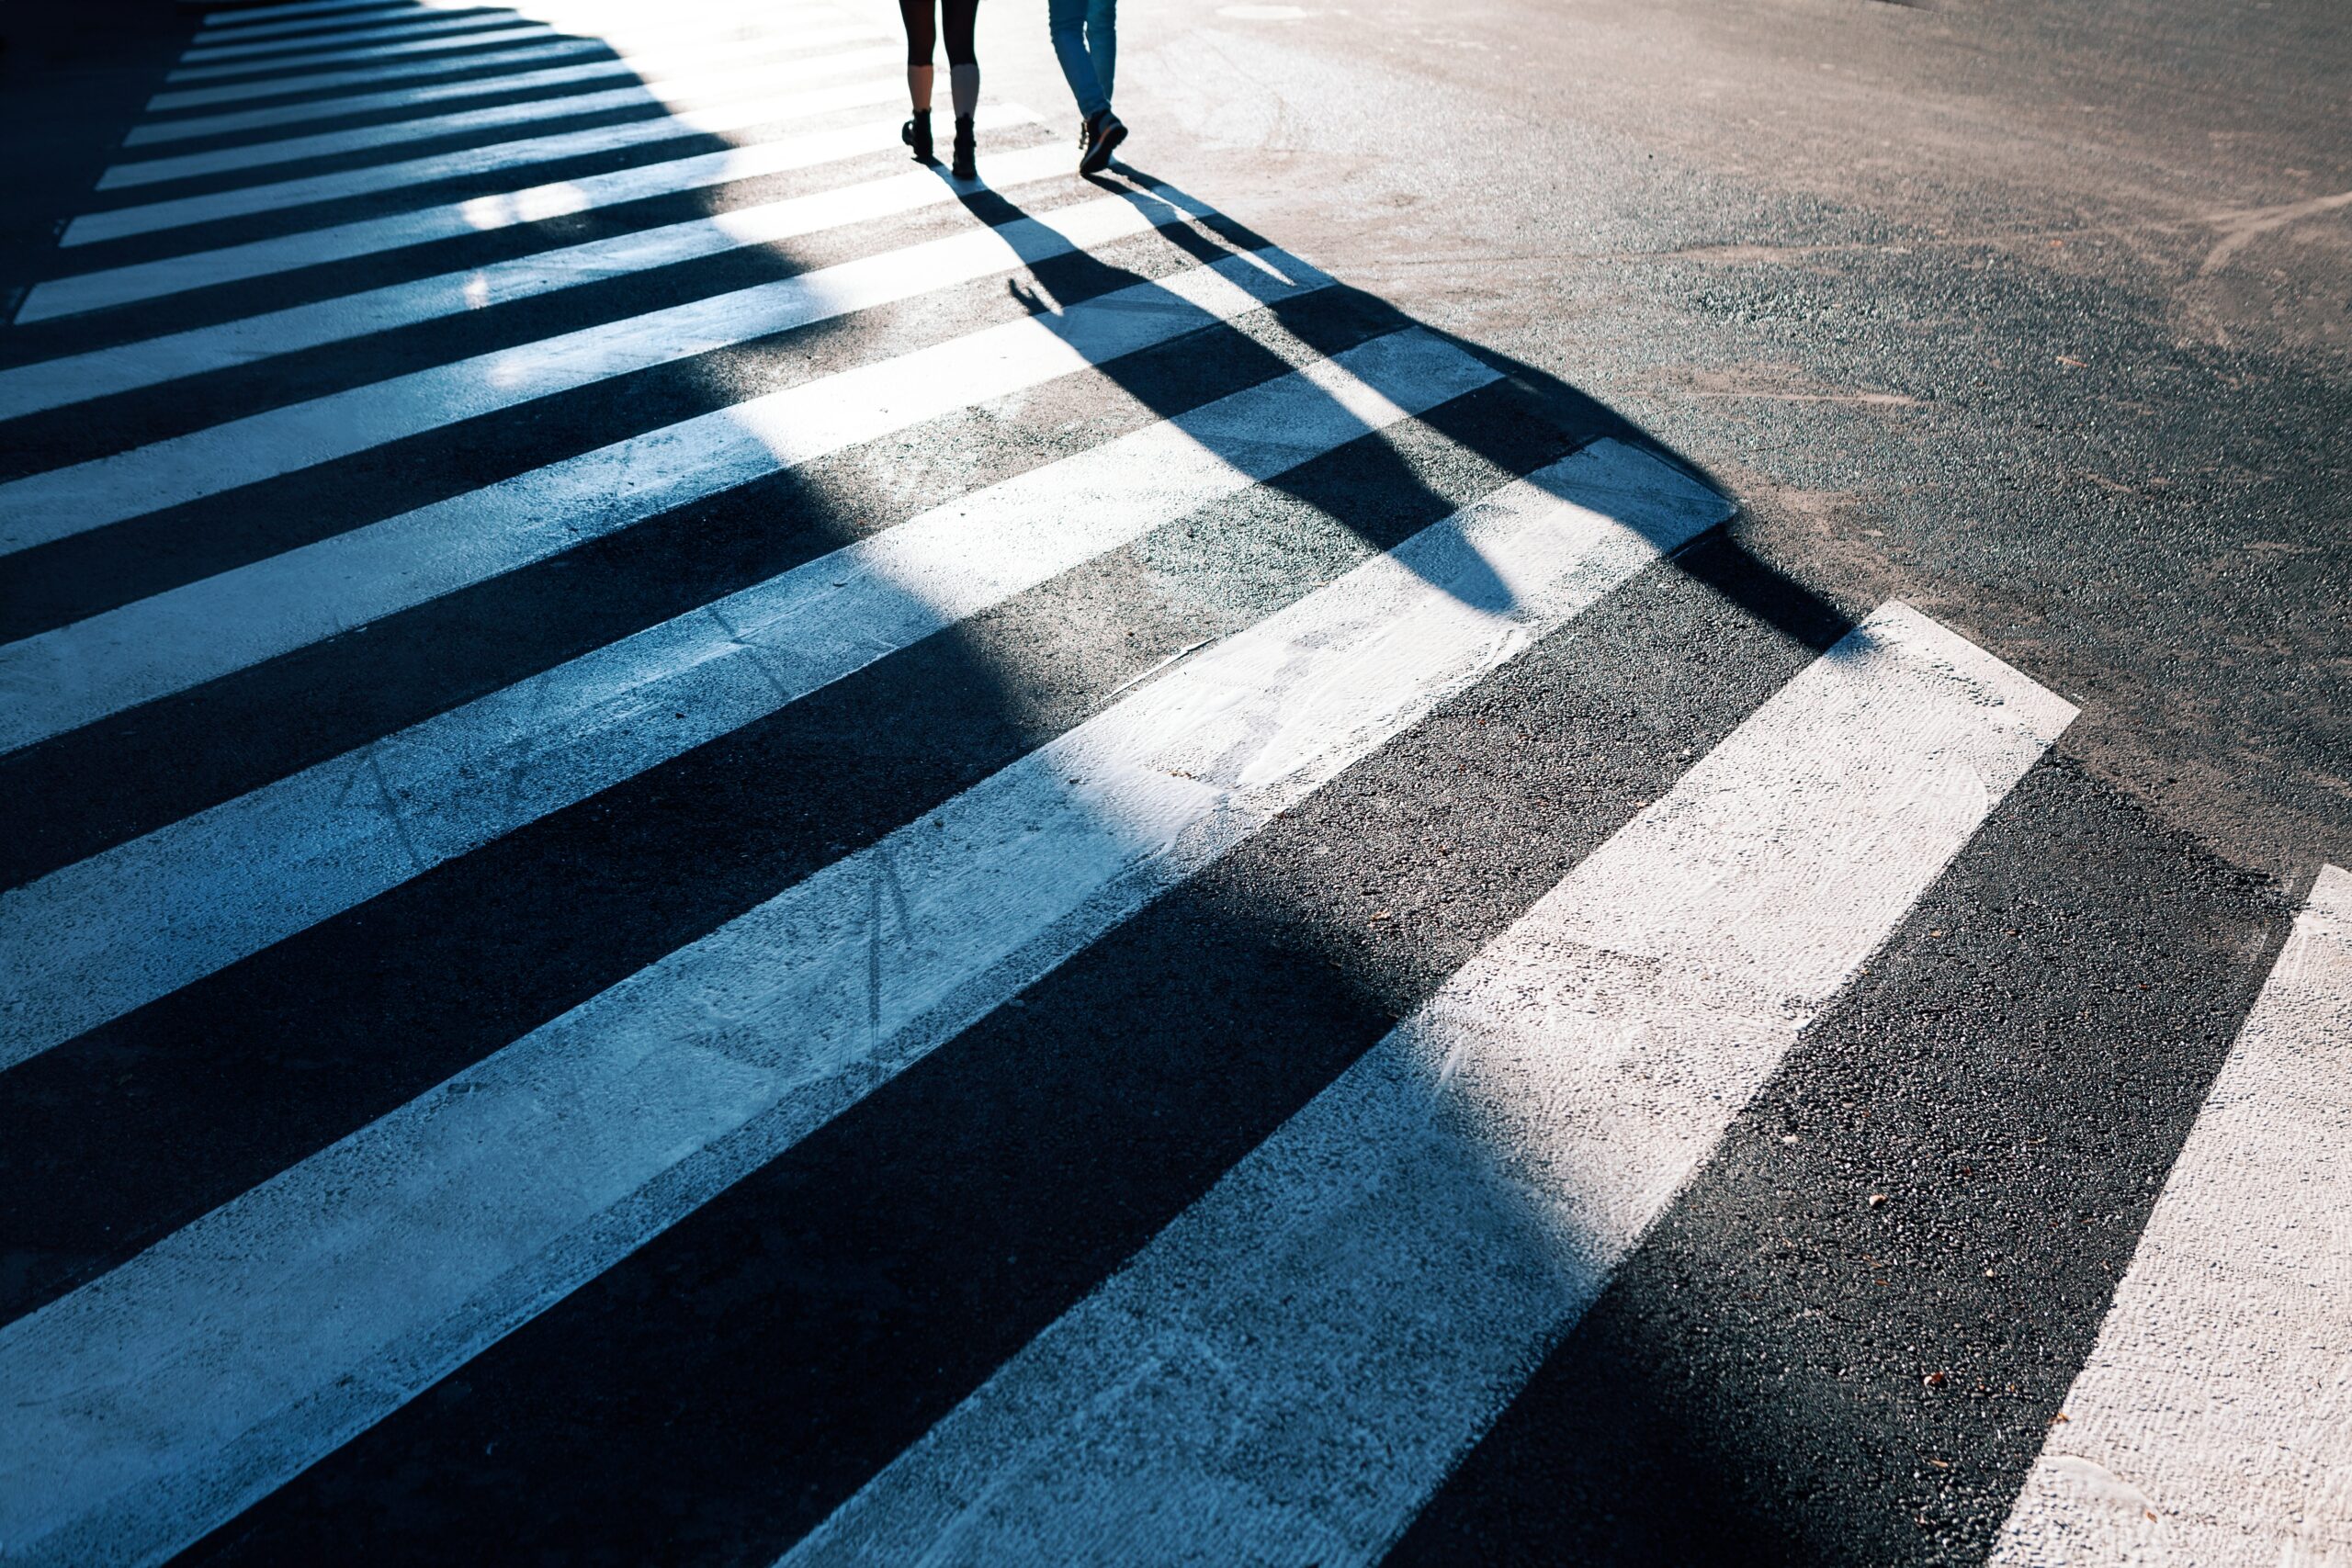 How Is Fault Determined in a Pedestrian Accident Case Involving a Drunk Driver?